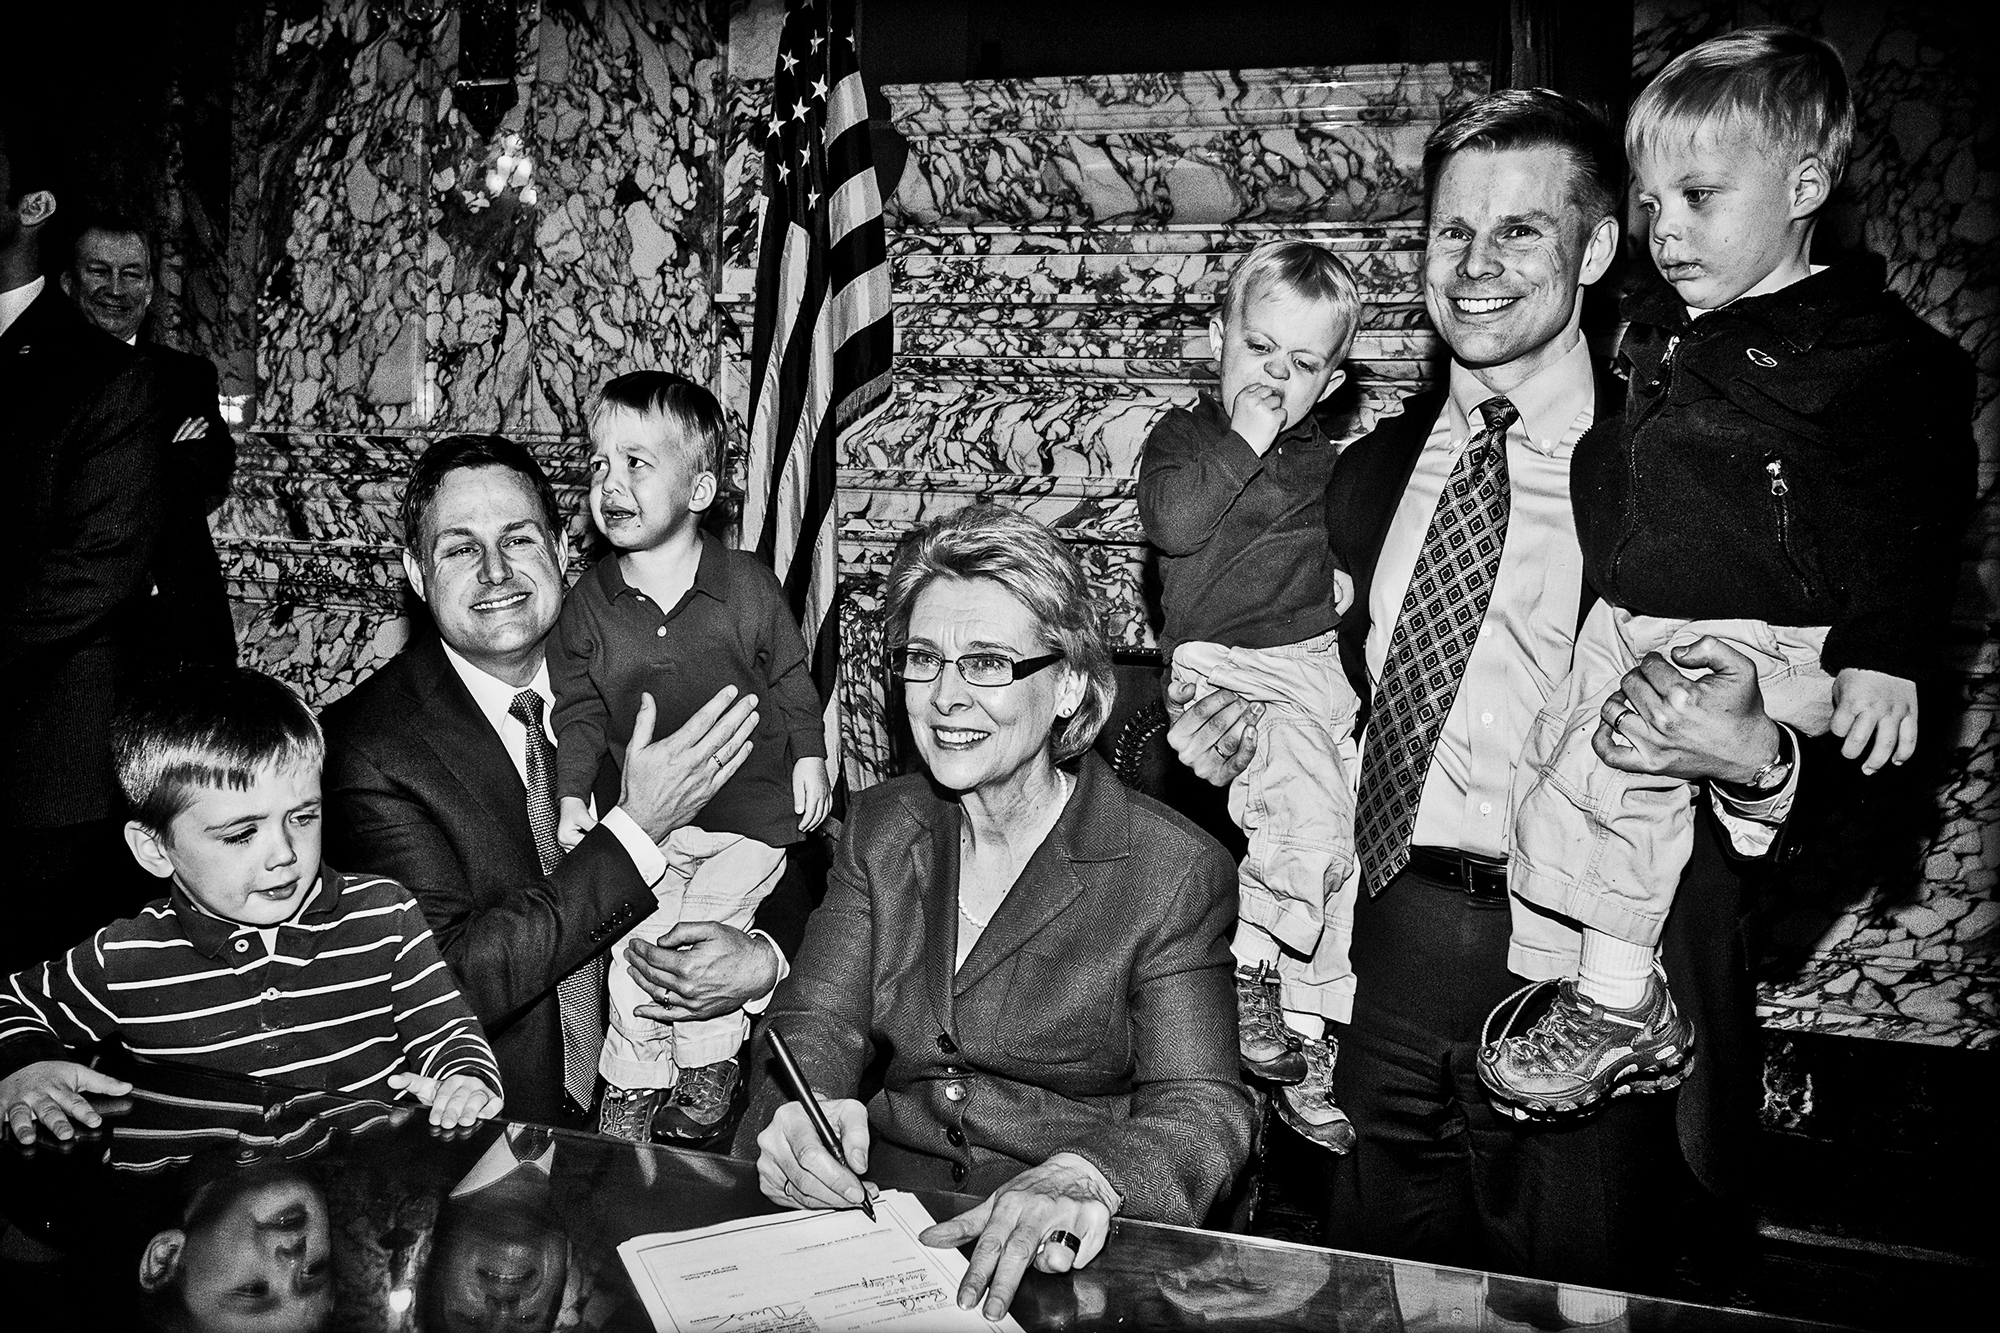 Washington state Governor Christine Gregoire signs marriage equality legislation in Olympia, Wash., on Feb. 13, 2012.